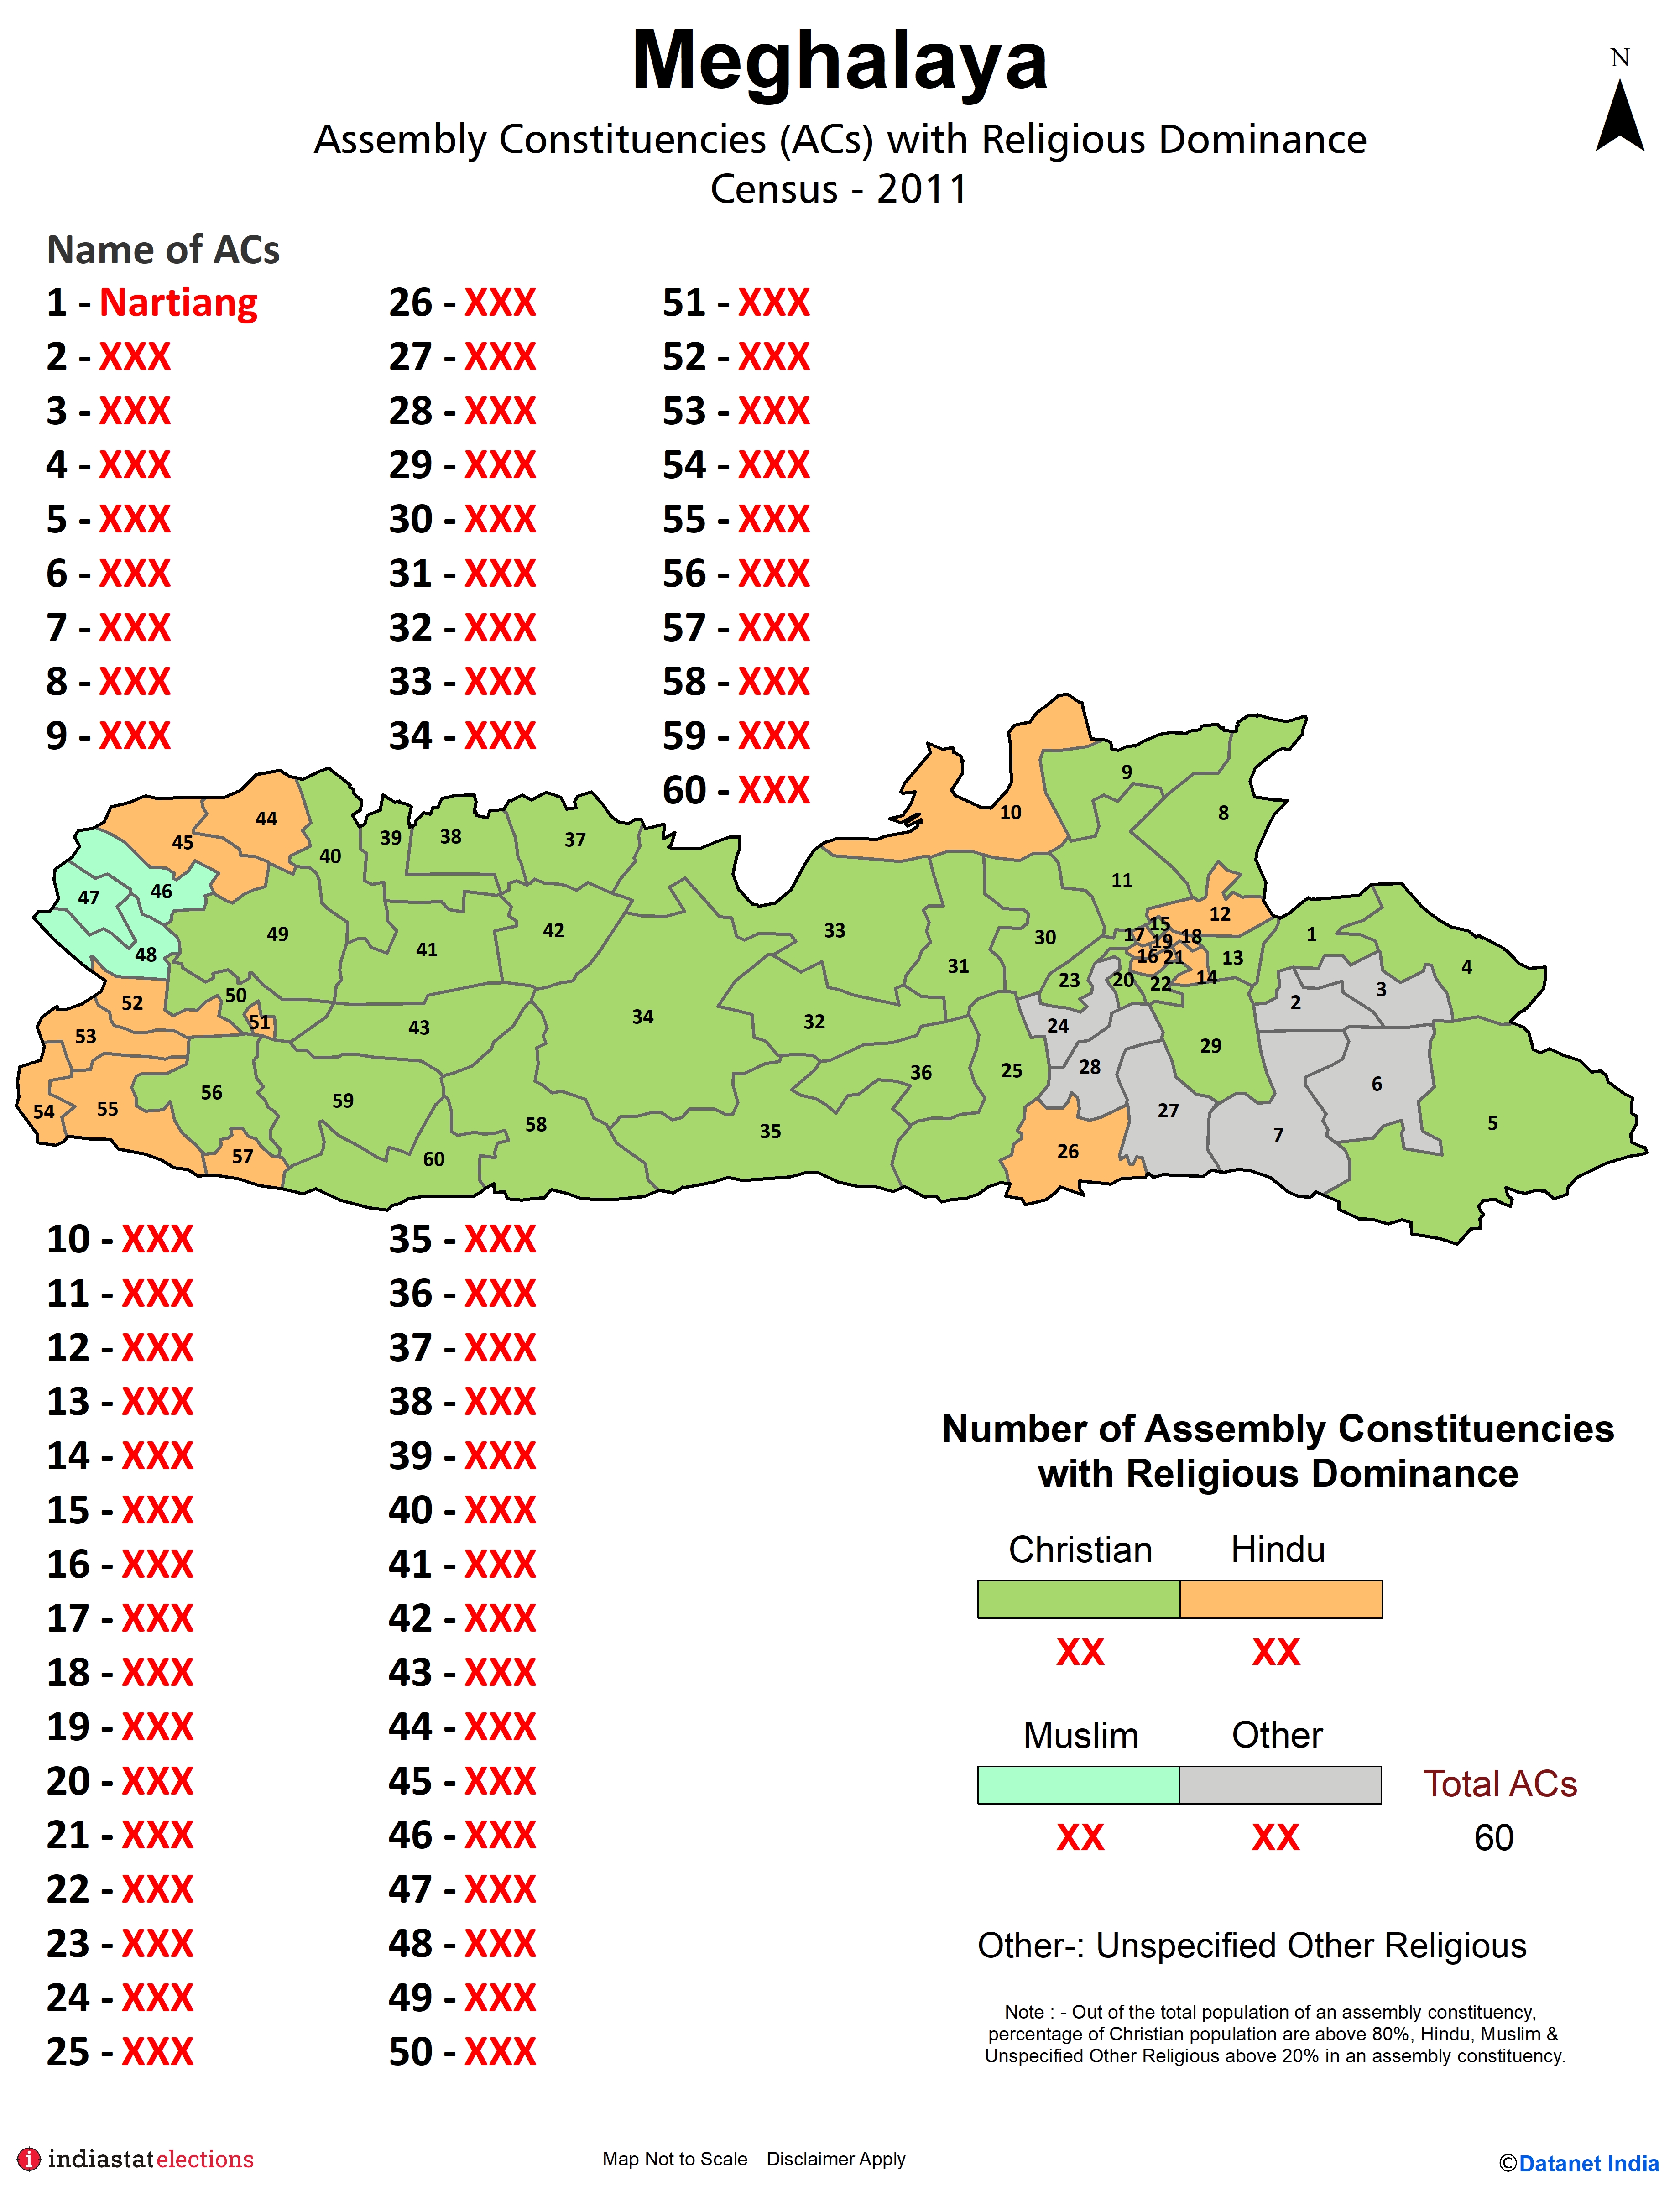 Assembly Constituencies (ACs) with Religious Dominance in Meghalaya - Census 2011